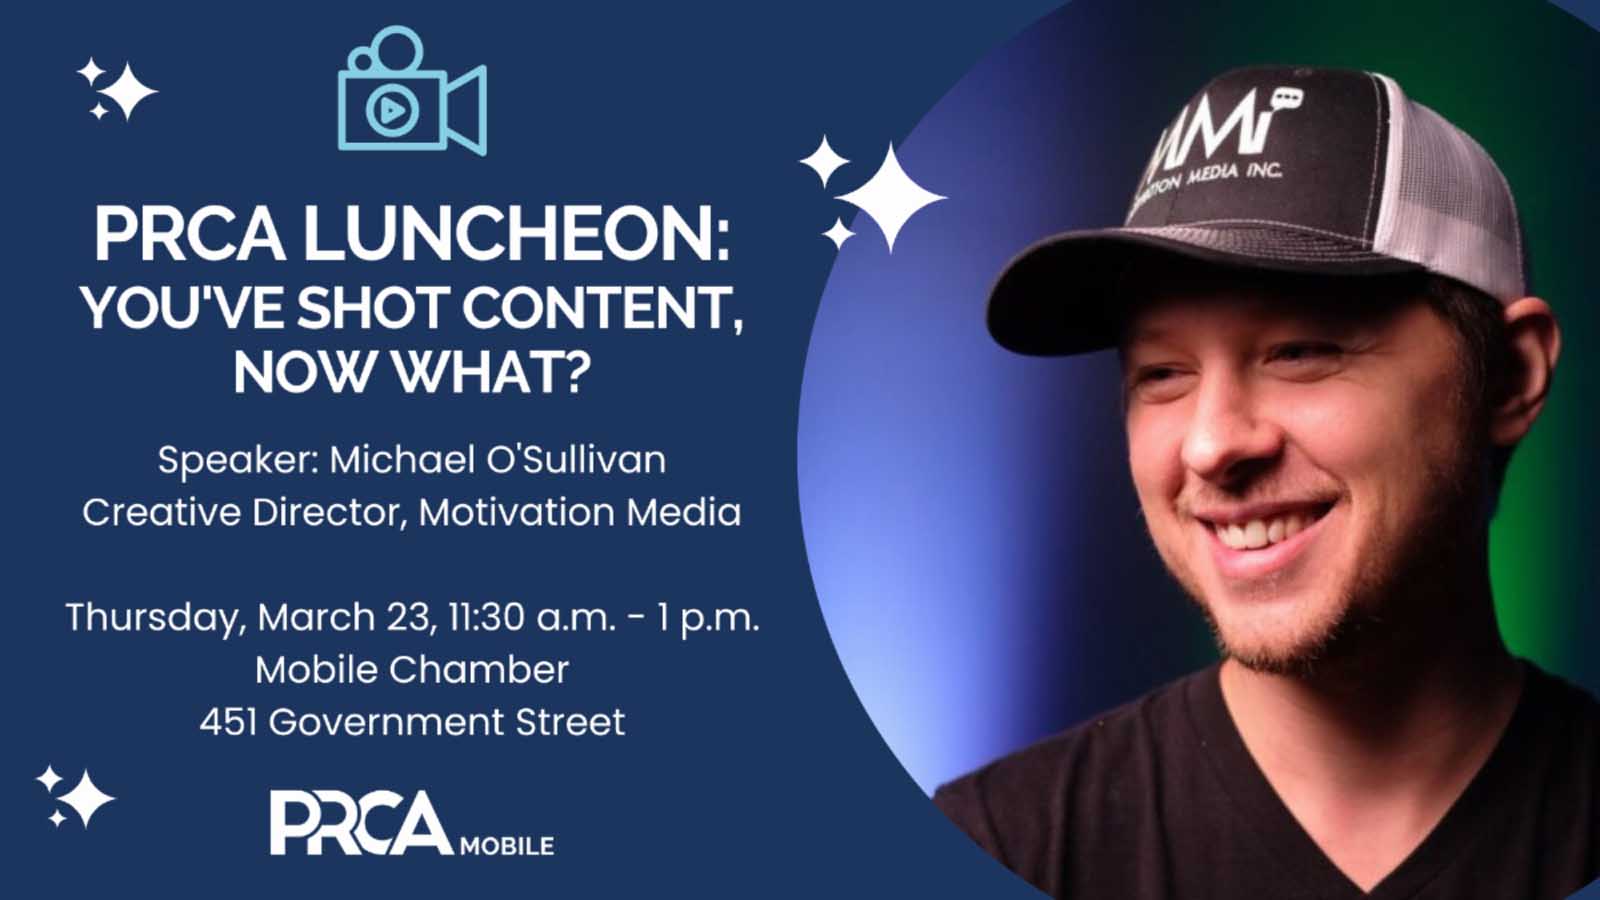 PRCA March Luncheon To Focus On Photo And Video Content